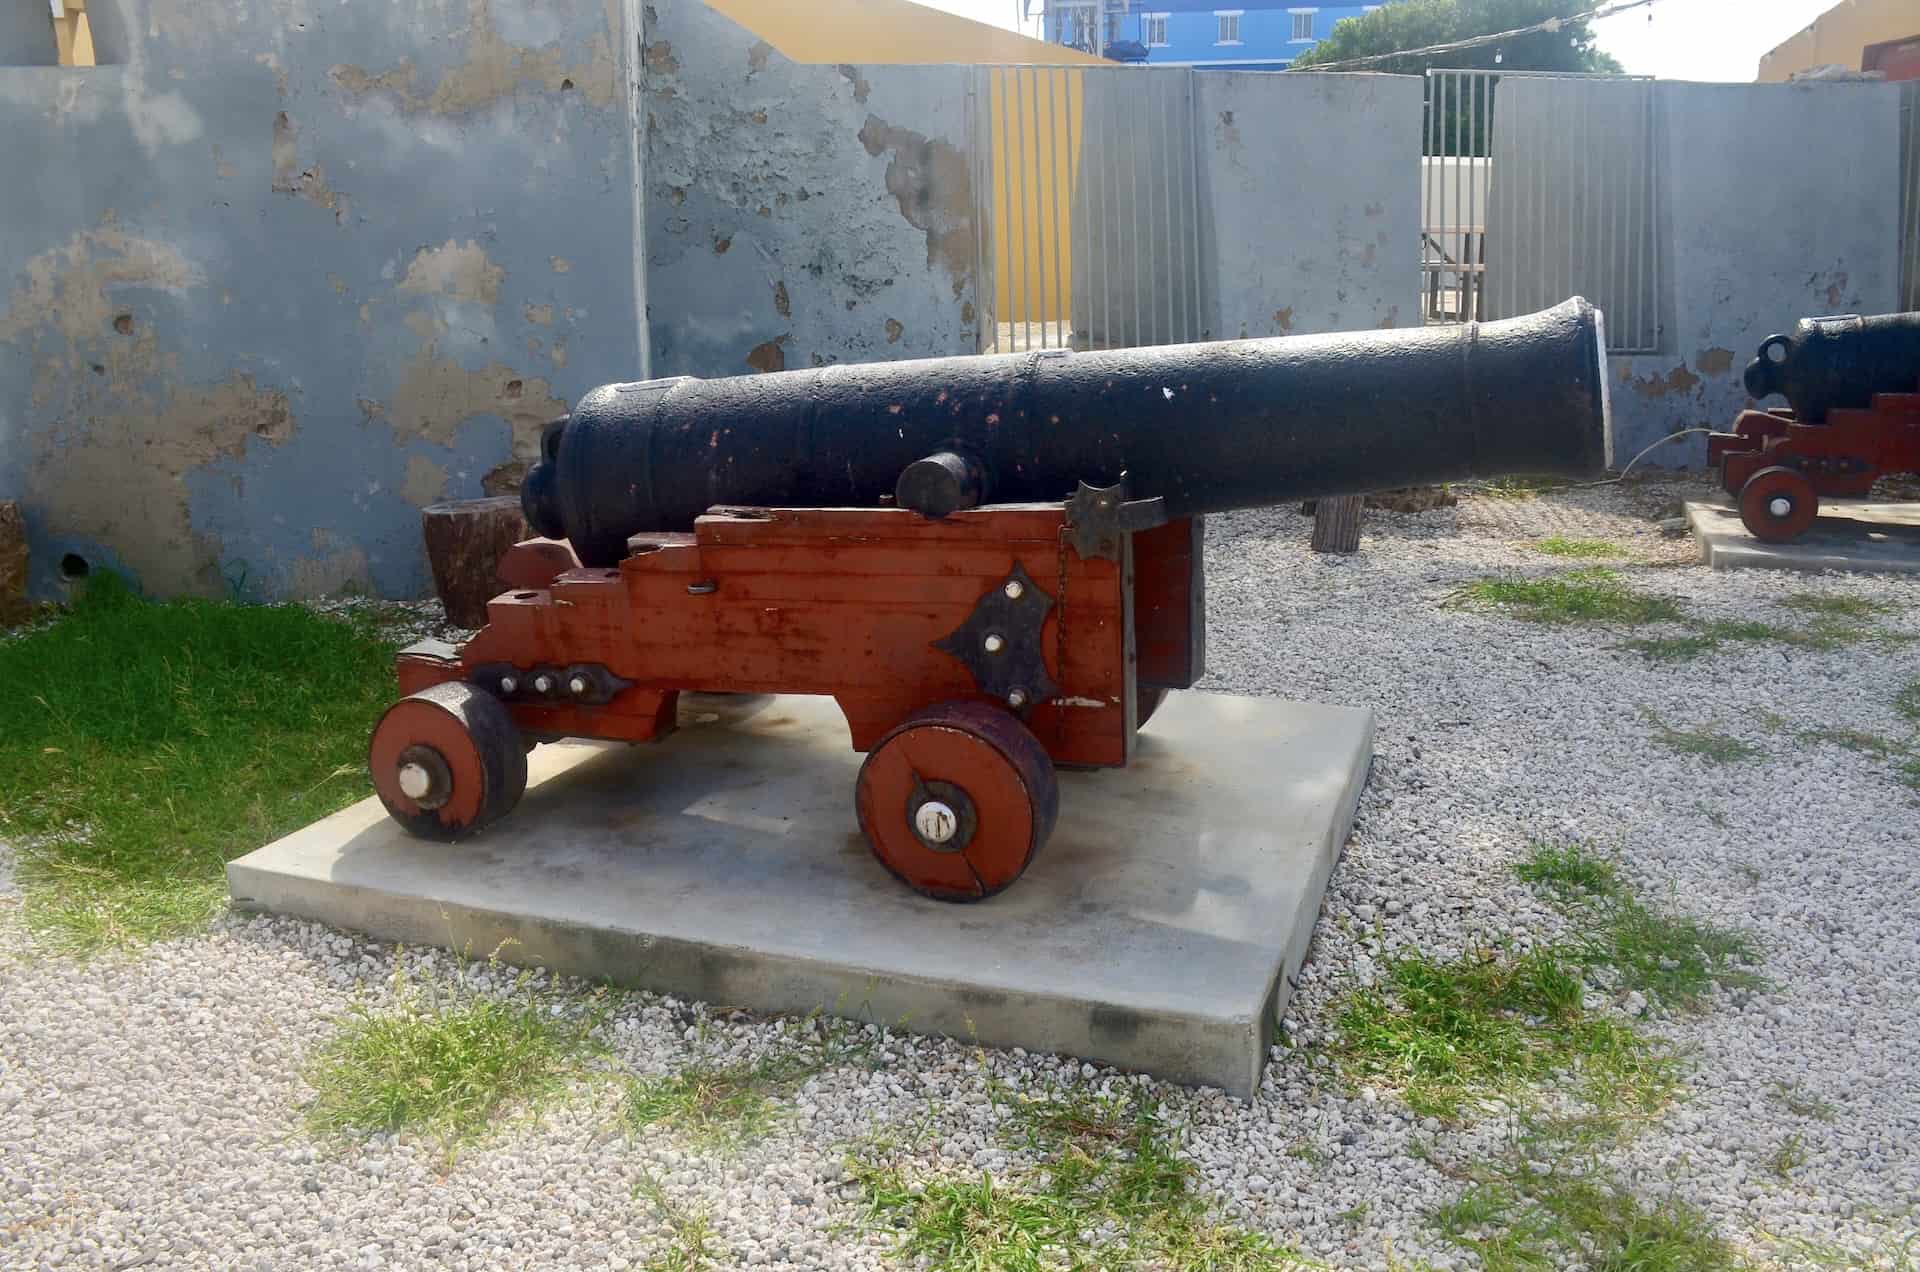 Cannon at Fort Zoutman